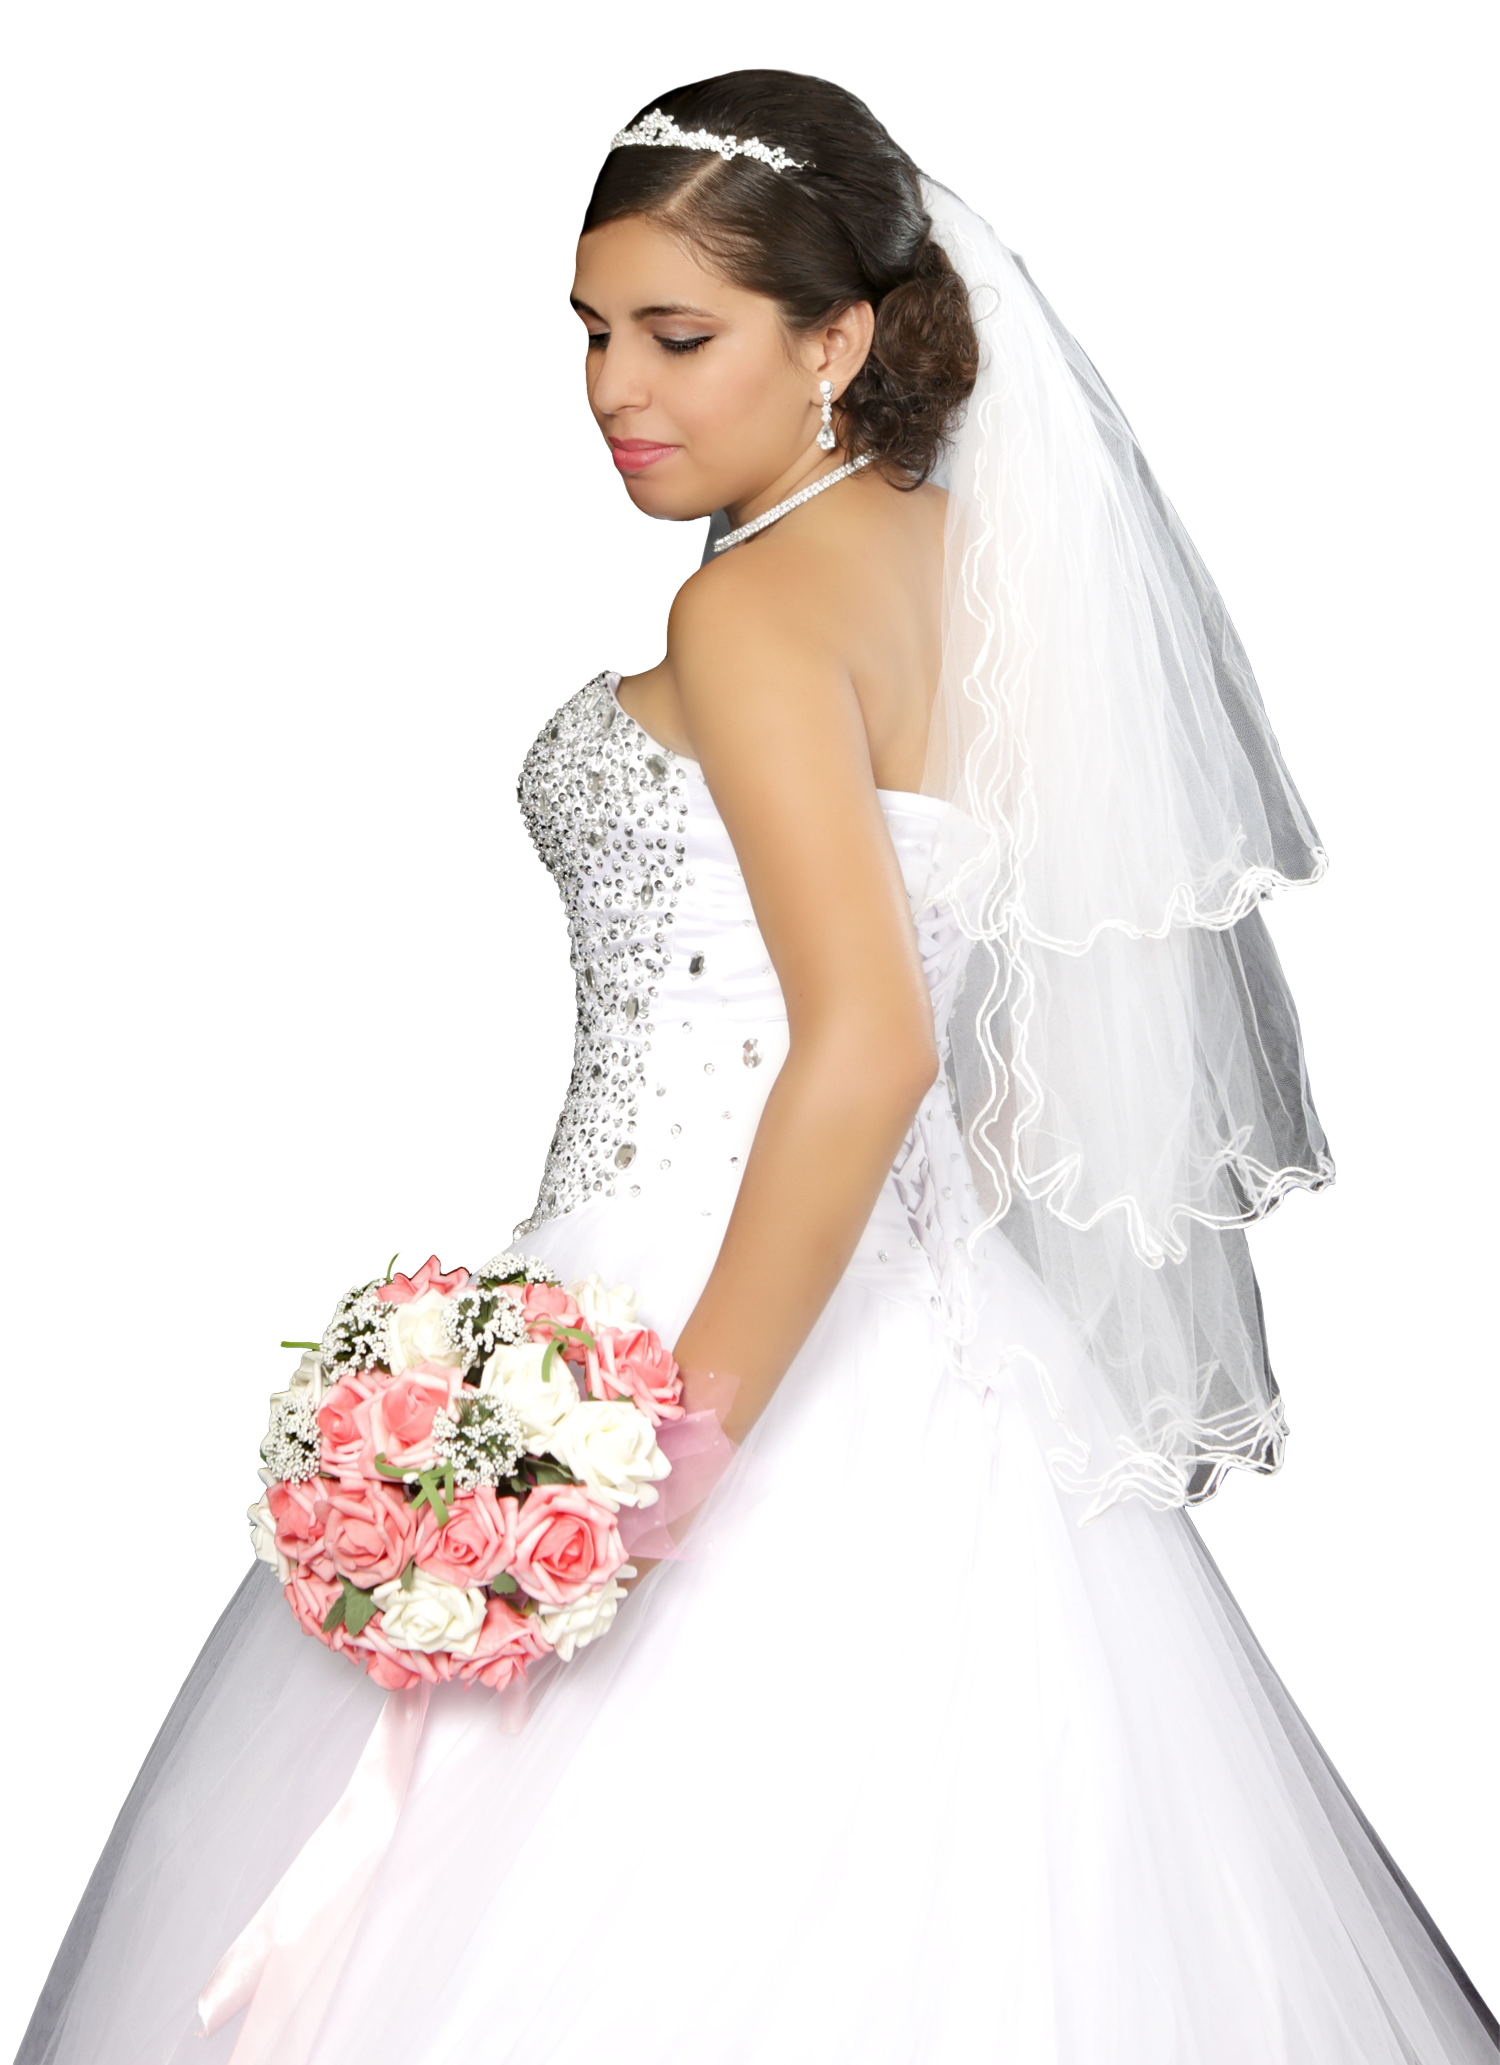 Wedding Girl PNG Transparent Image, Grill HD PNG - Free PNG